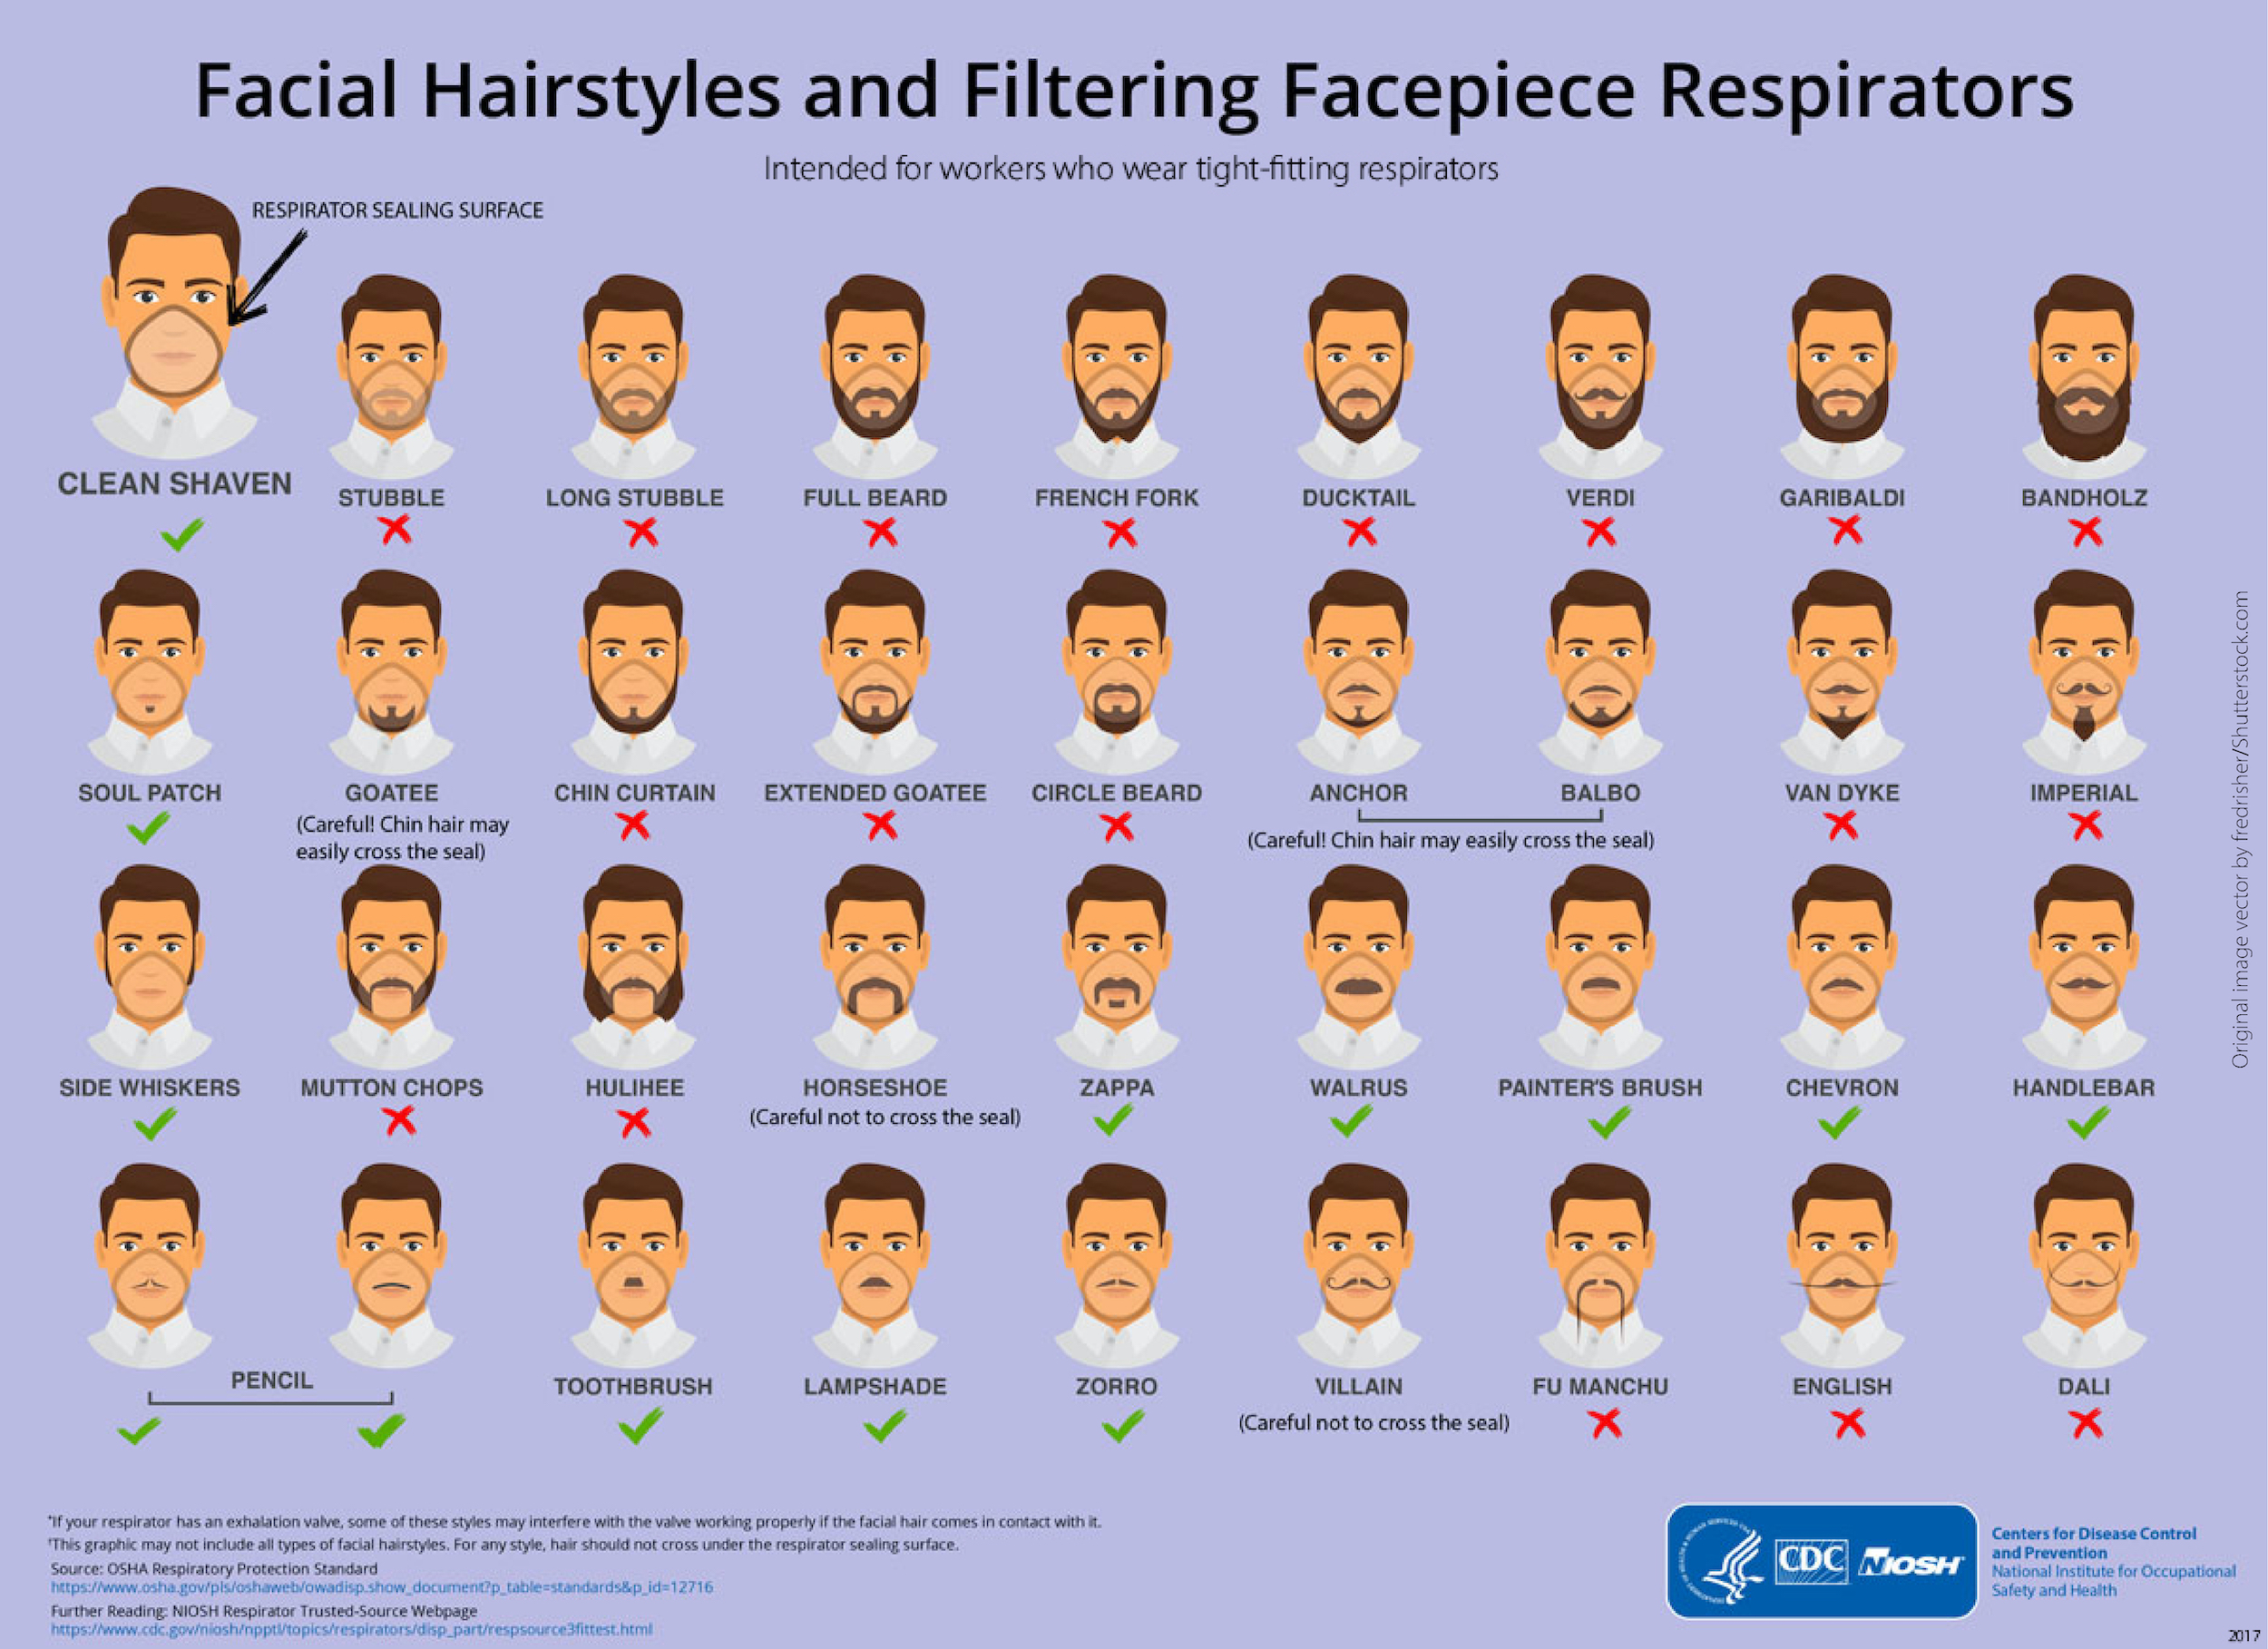 This infographic showing the proper fit for a respirator mask was featured on "Good Morning America," "The Late Show With Stephen Colbert" and other programs. Credit: CDC/NIOSH